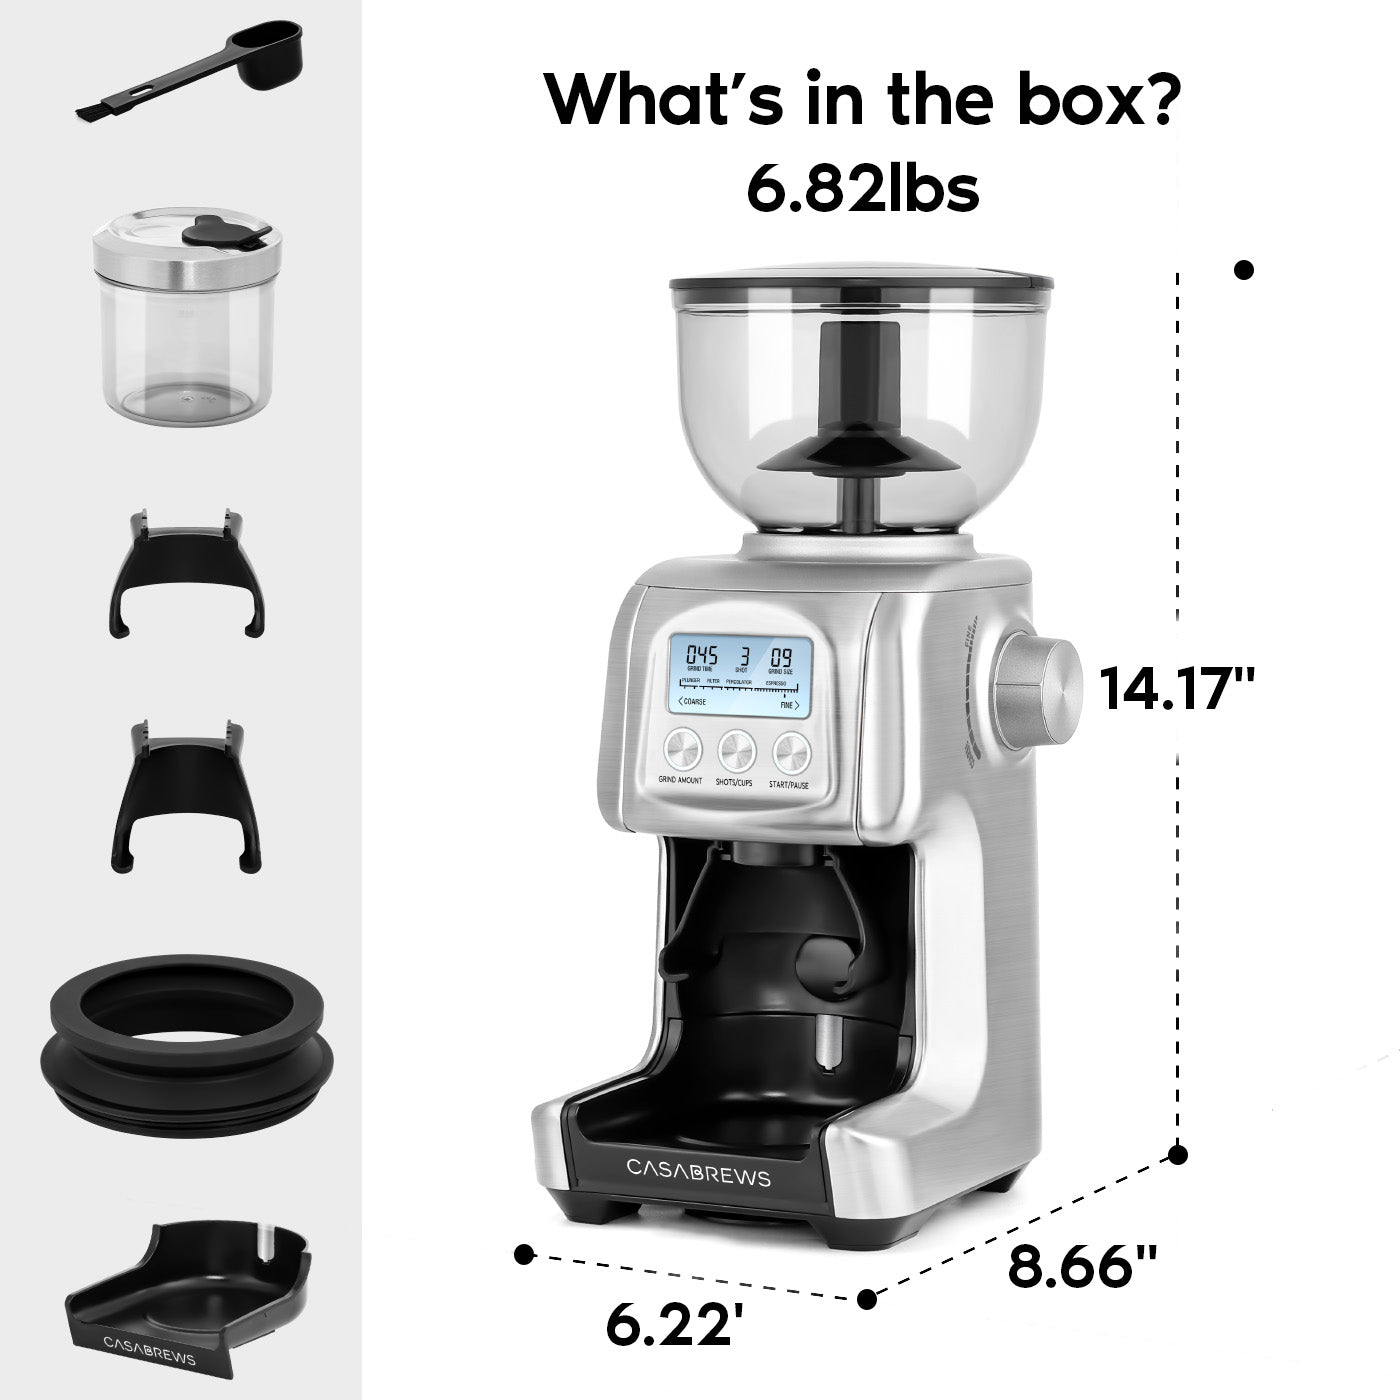 CASABREWS KWG-250H Electric Coffee Grinder with 77 Precise Grind Settings, LCD Display and Conical Burr Precision